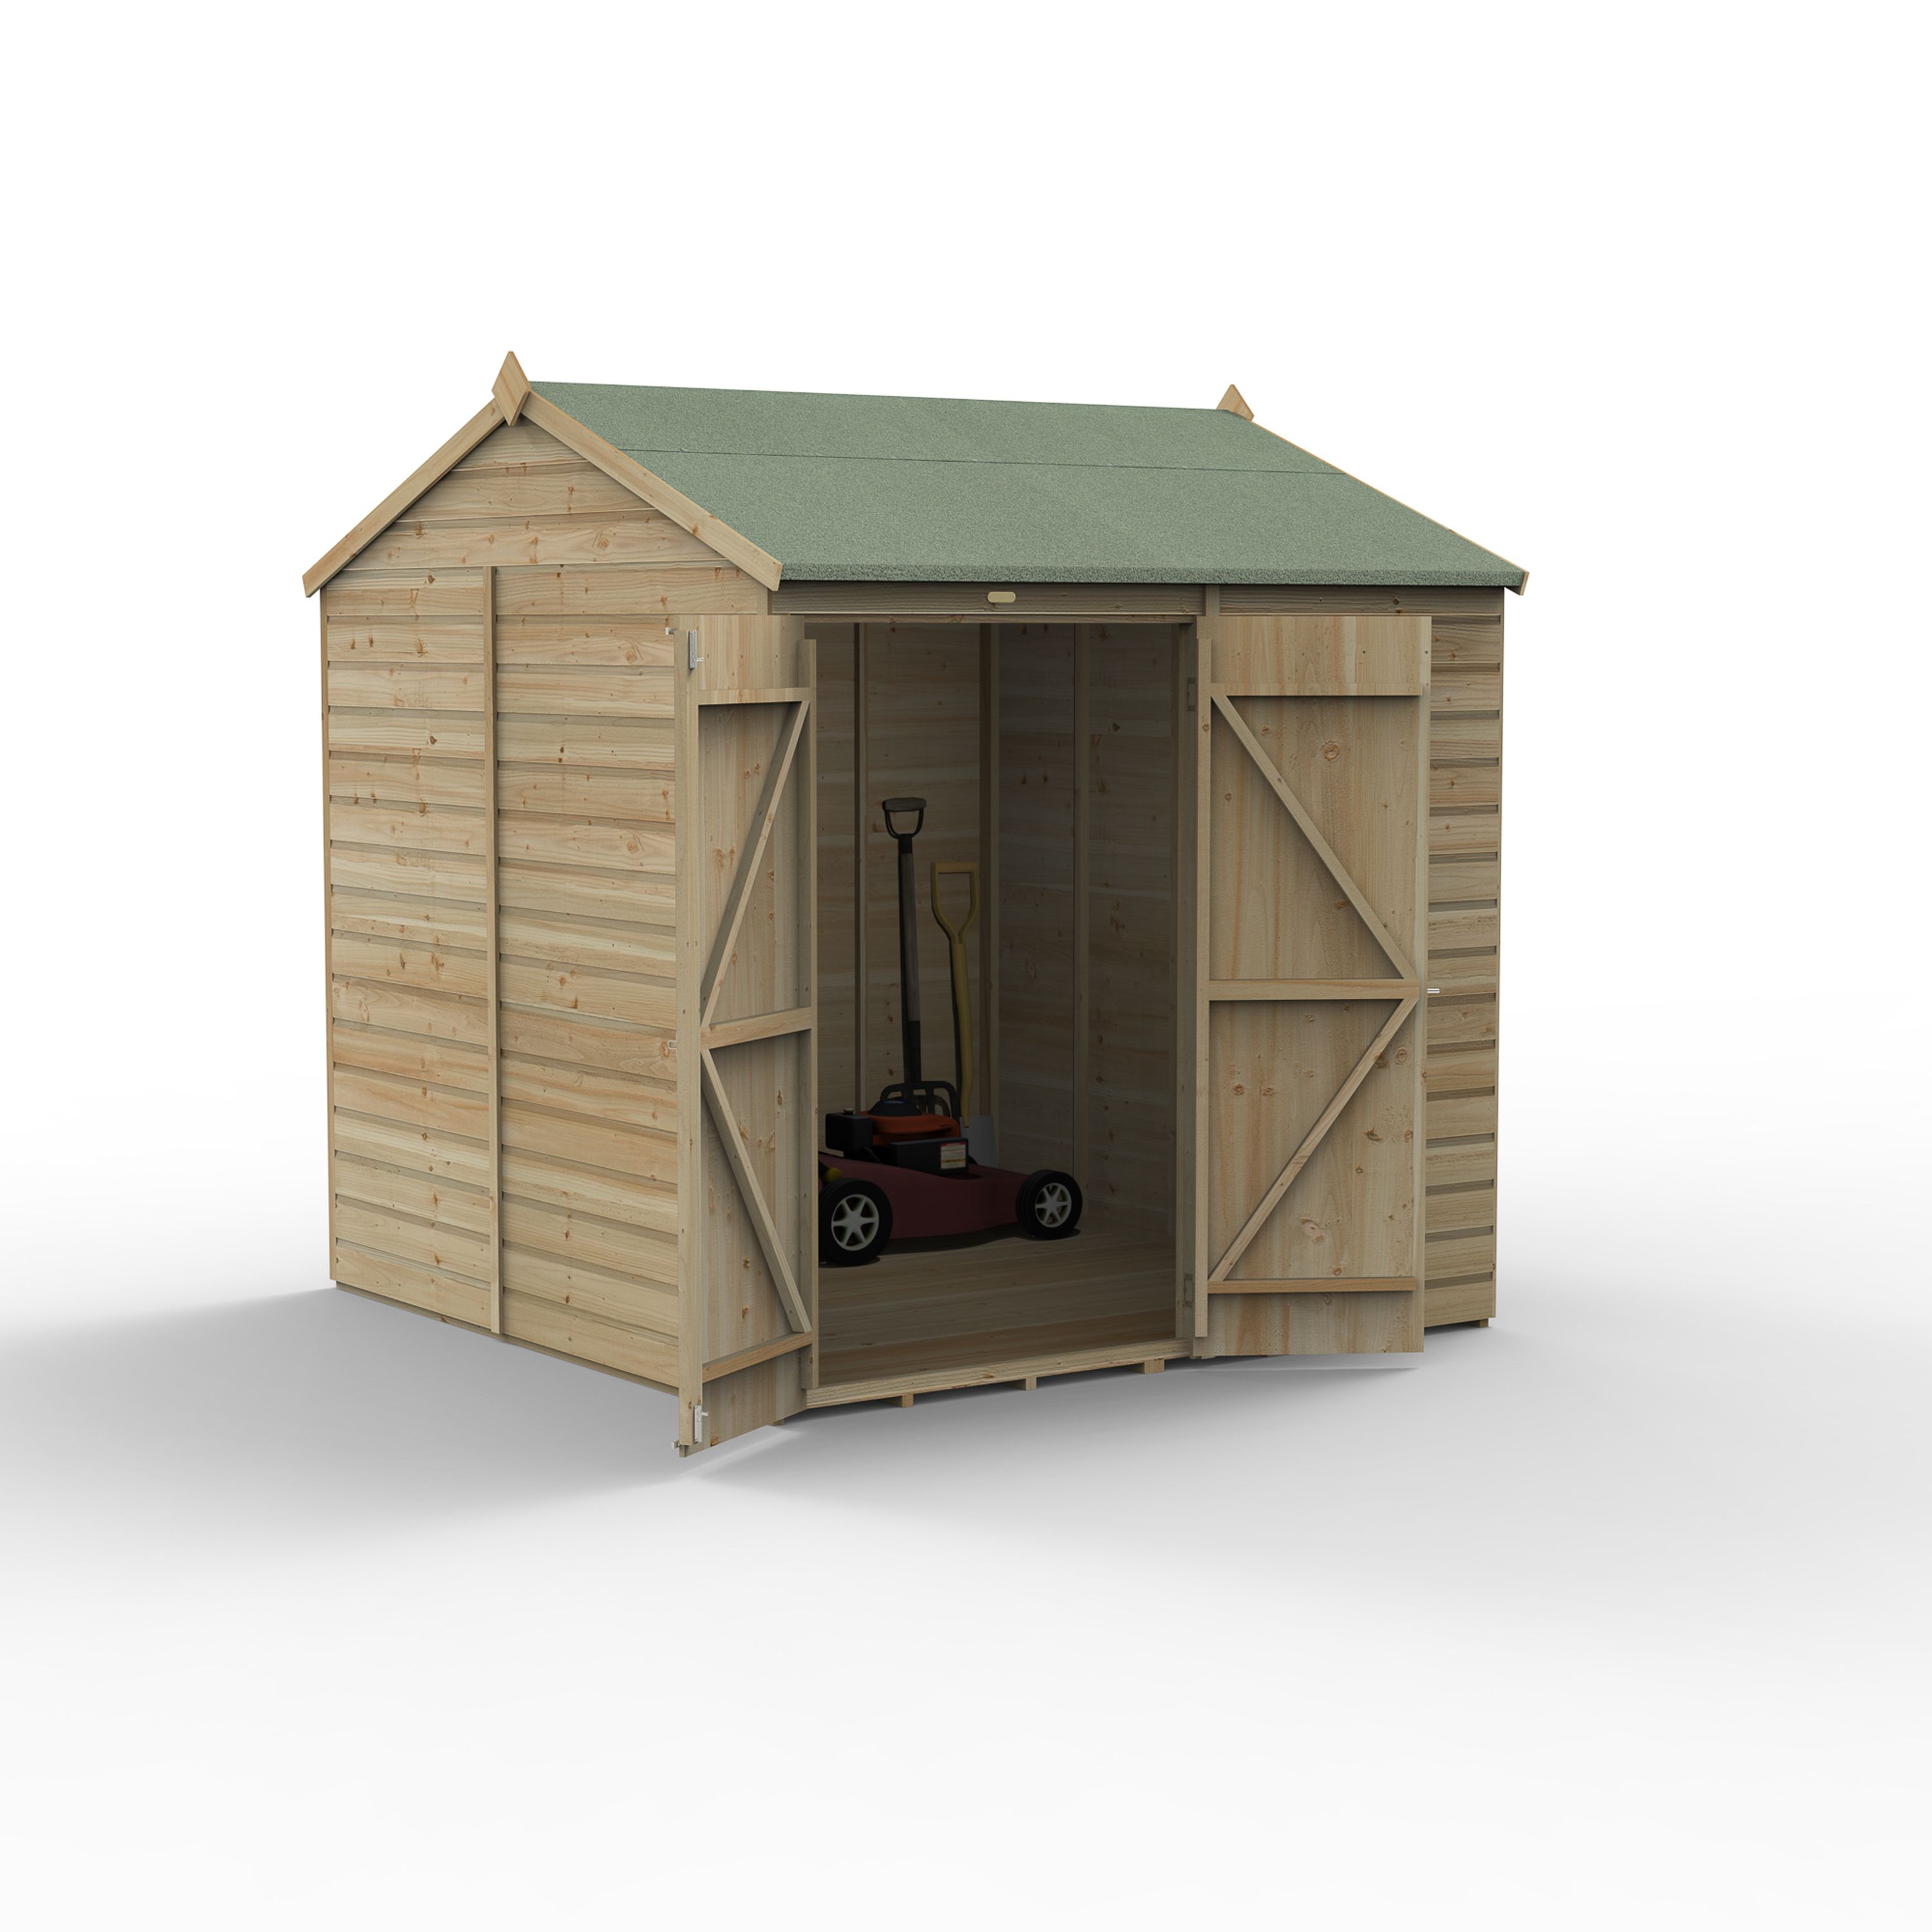 Forest Garden Beckwood 7x7 ft Reverse apex Natural timber Wooden 2 door Shed with floor (Base included)